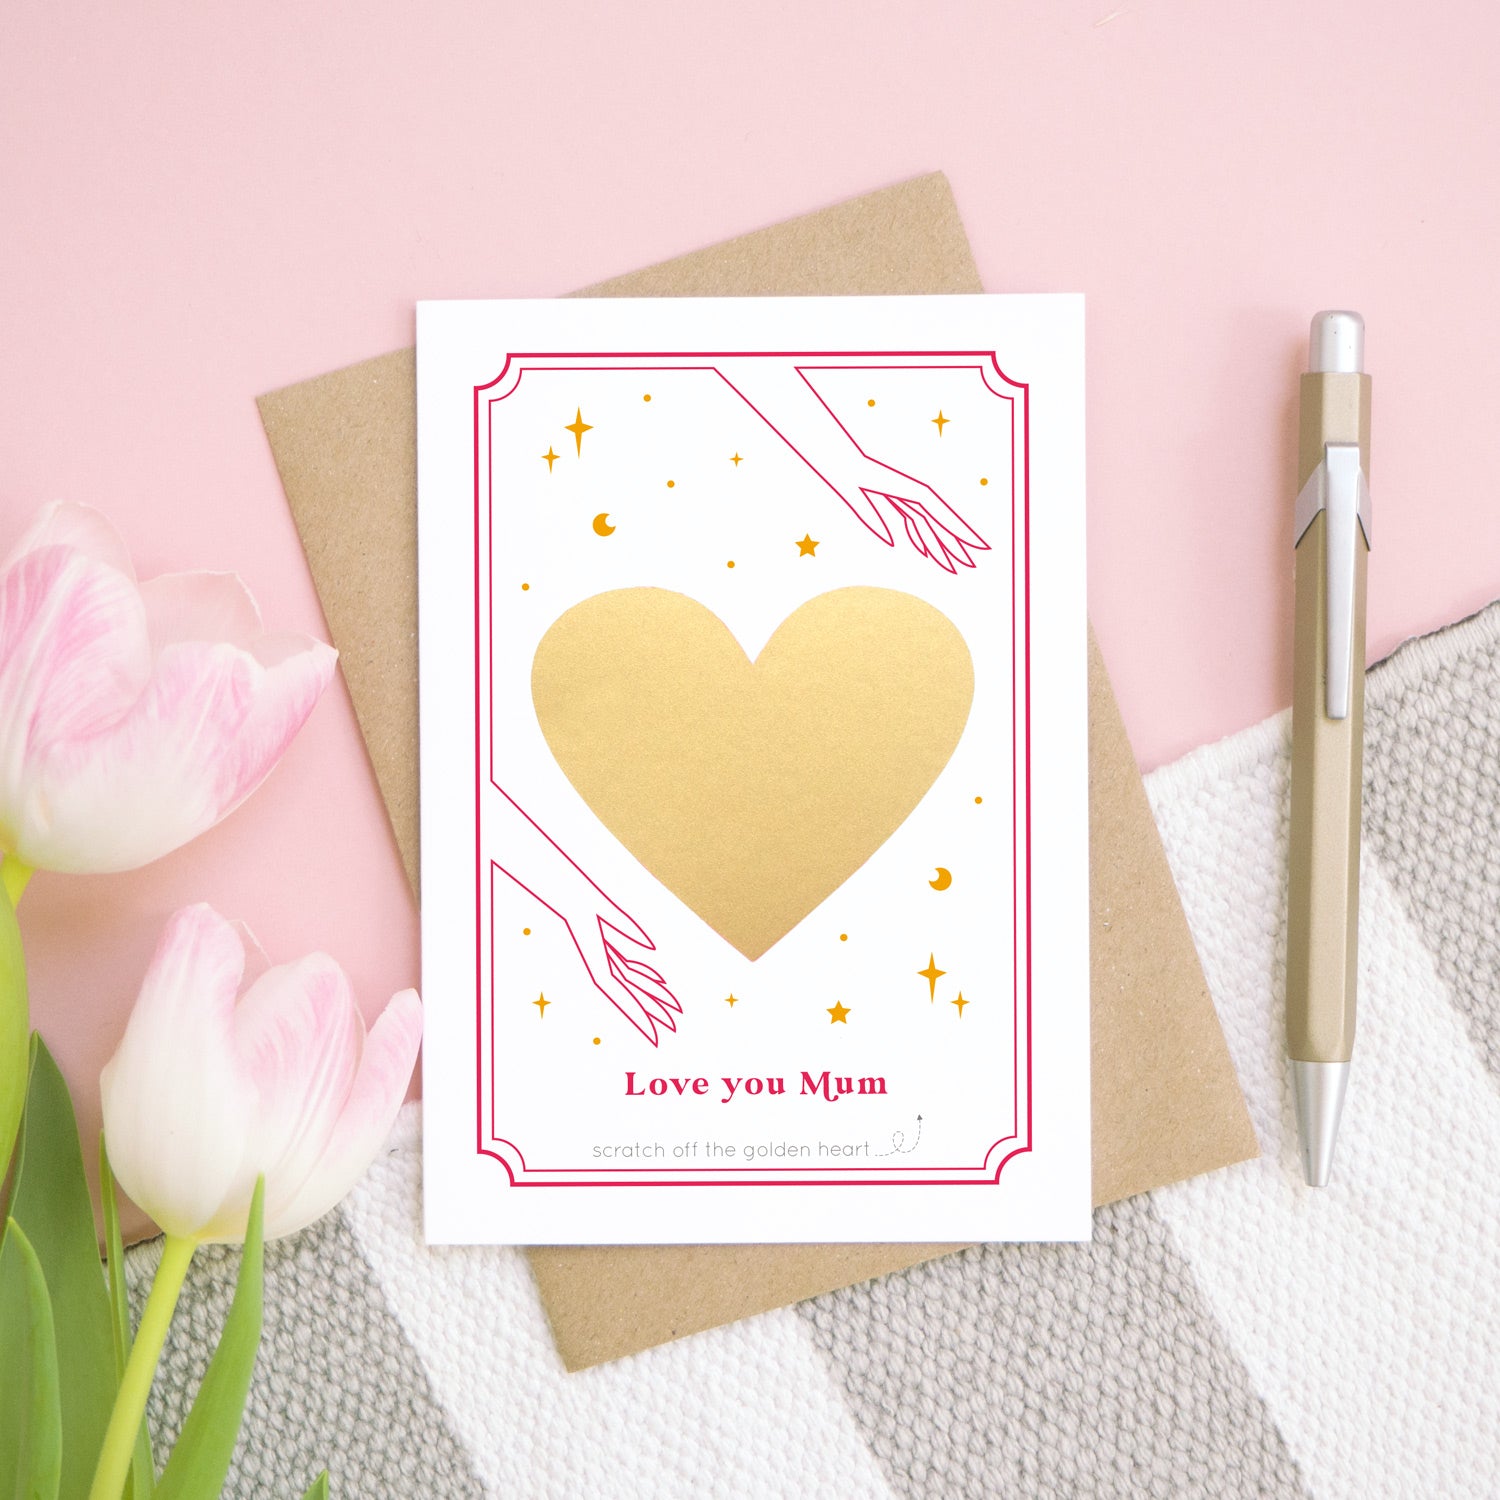 A personalised 'love you...' card before the gold heart has been scratched off. It has been shot on a pink background, with tulips and a pen for scale.